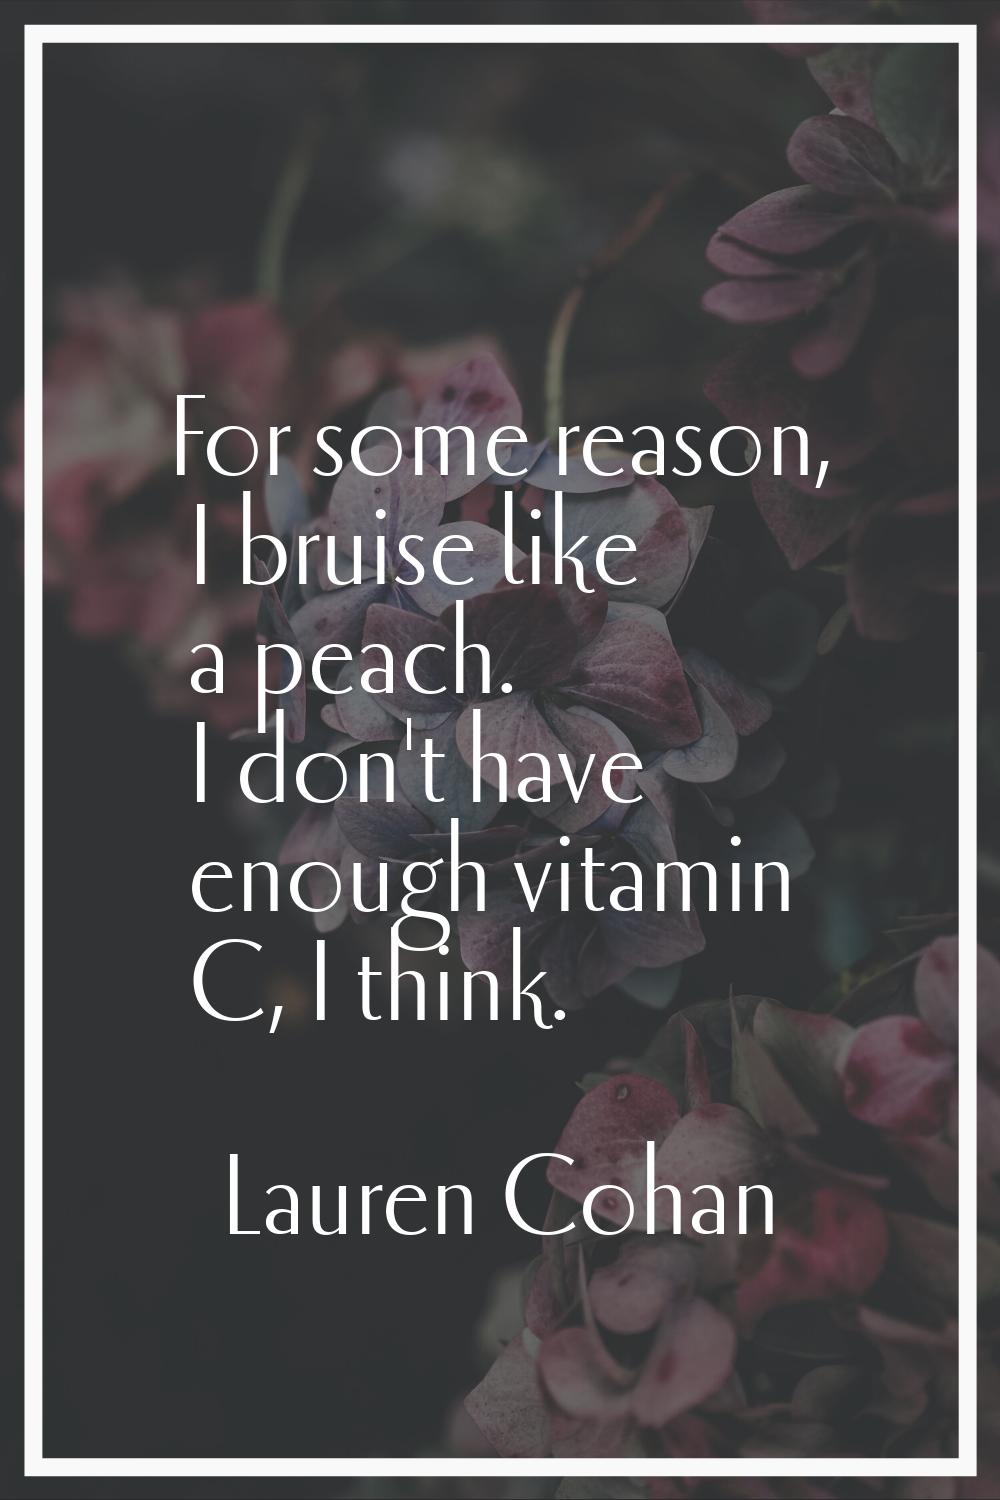 For some reason, I bruise like a peach. I don't have enough vitamin C, I think.